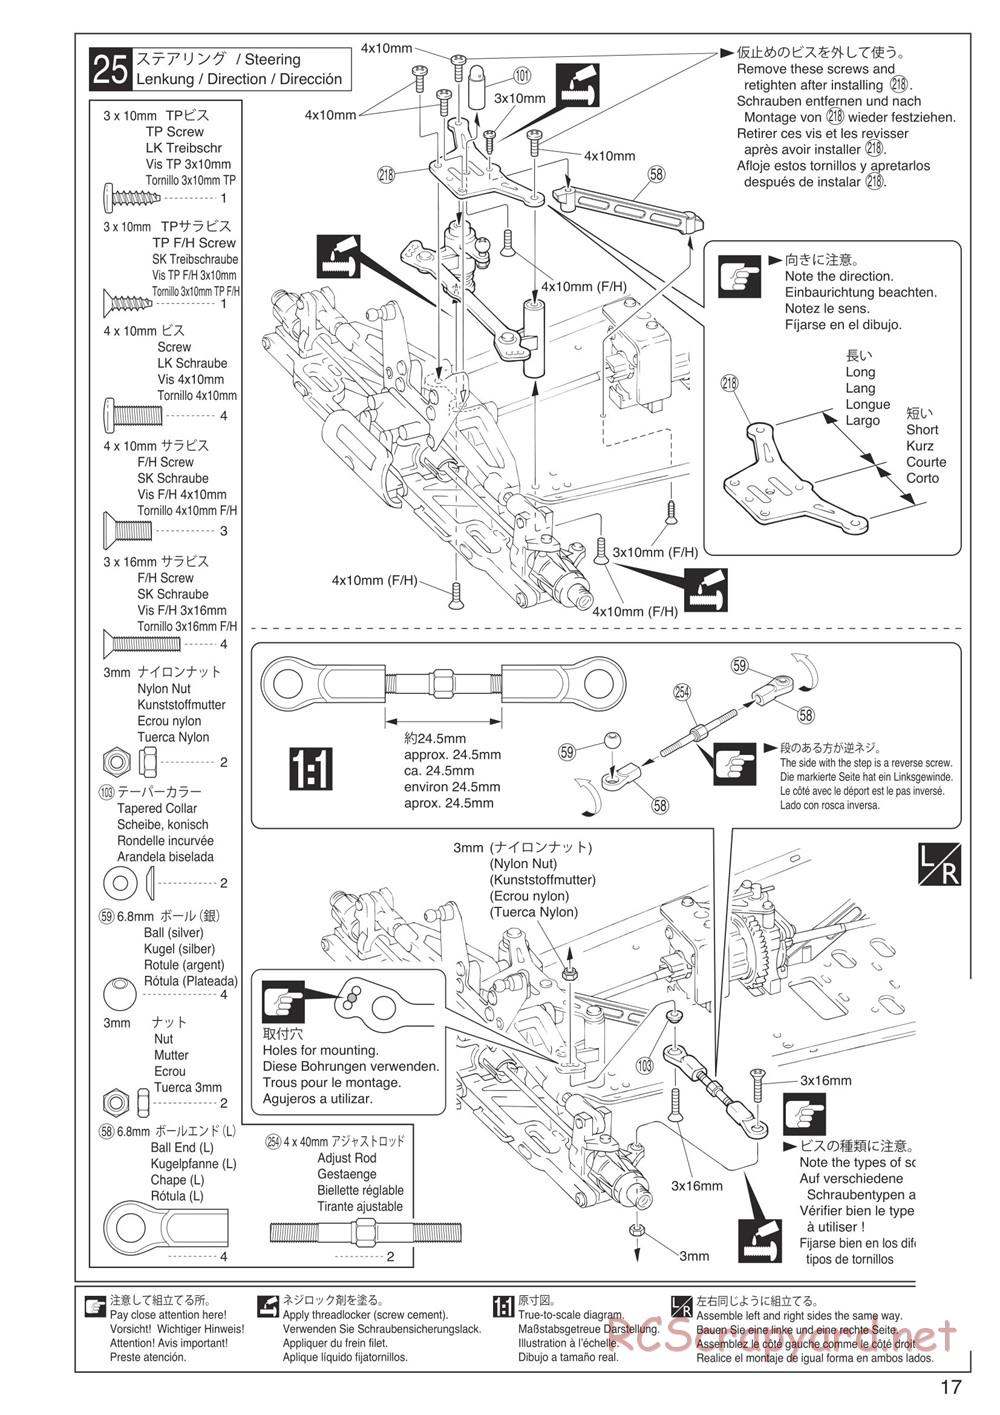 Kyosho - Inferno Neo - Manual - Page 17